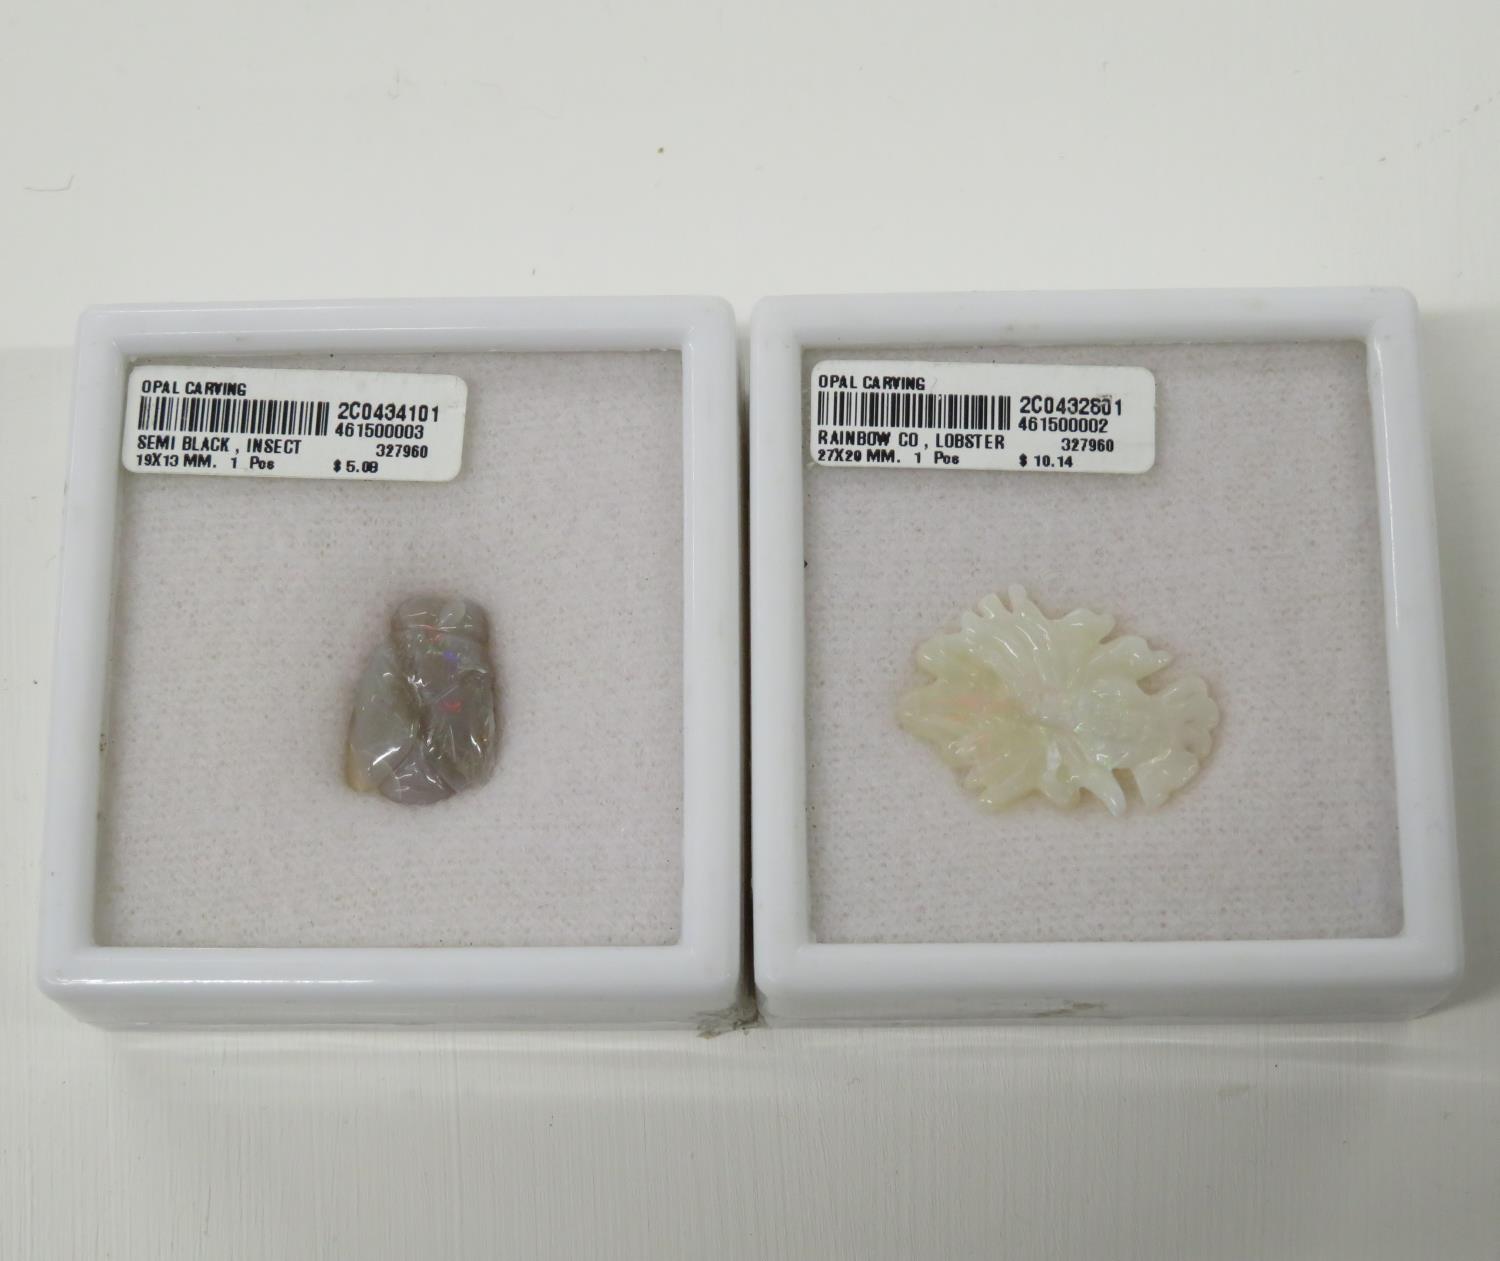 2x Small opal carvings